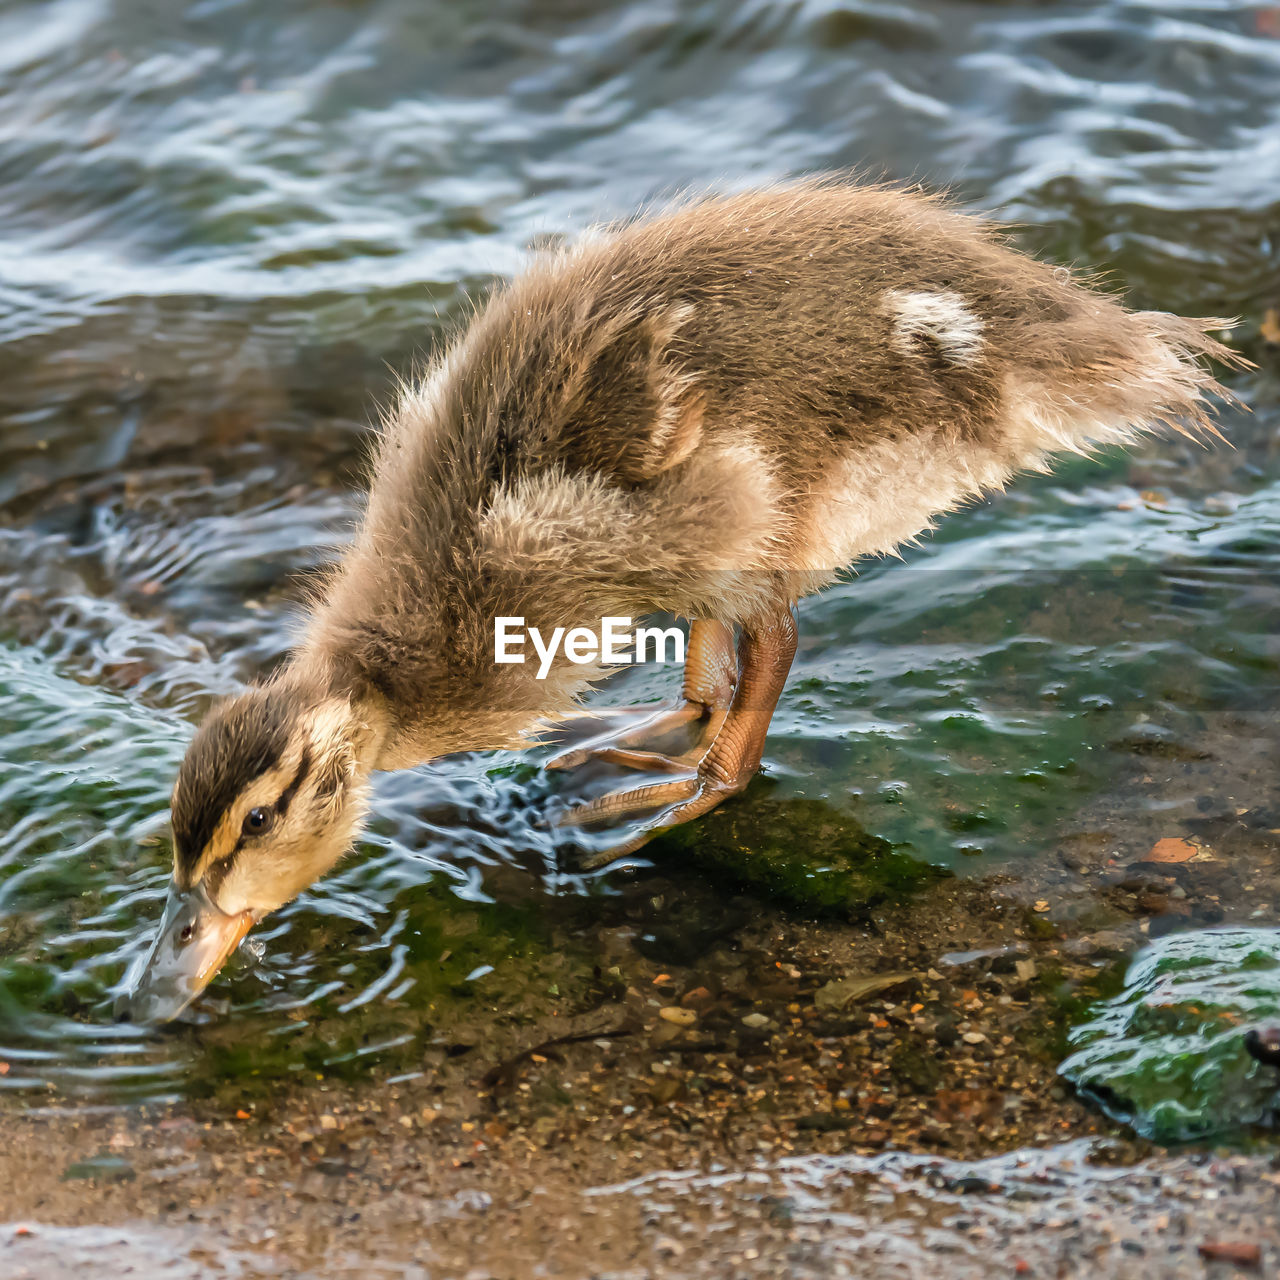 SIDE VIEW OF DUCK DRINKING WATER